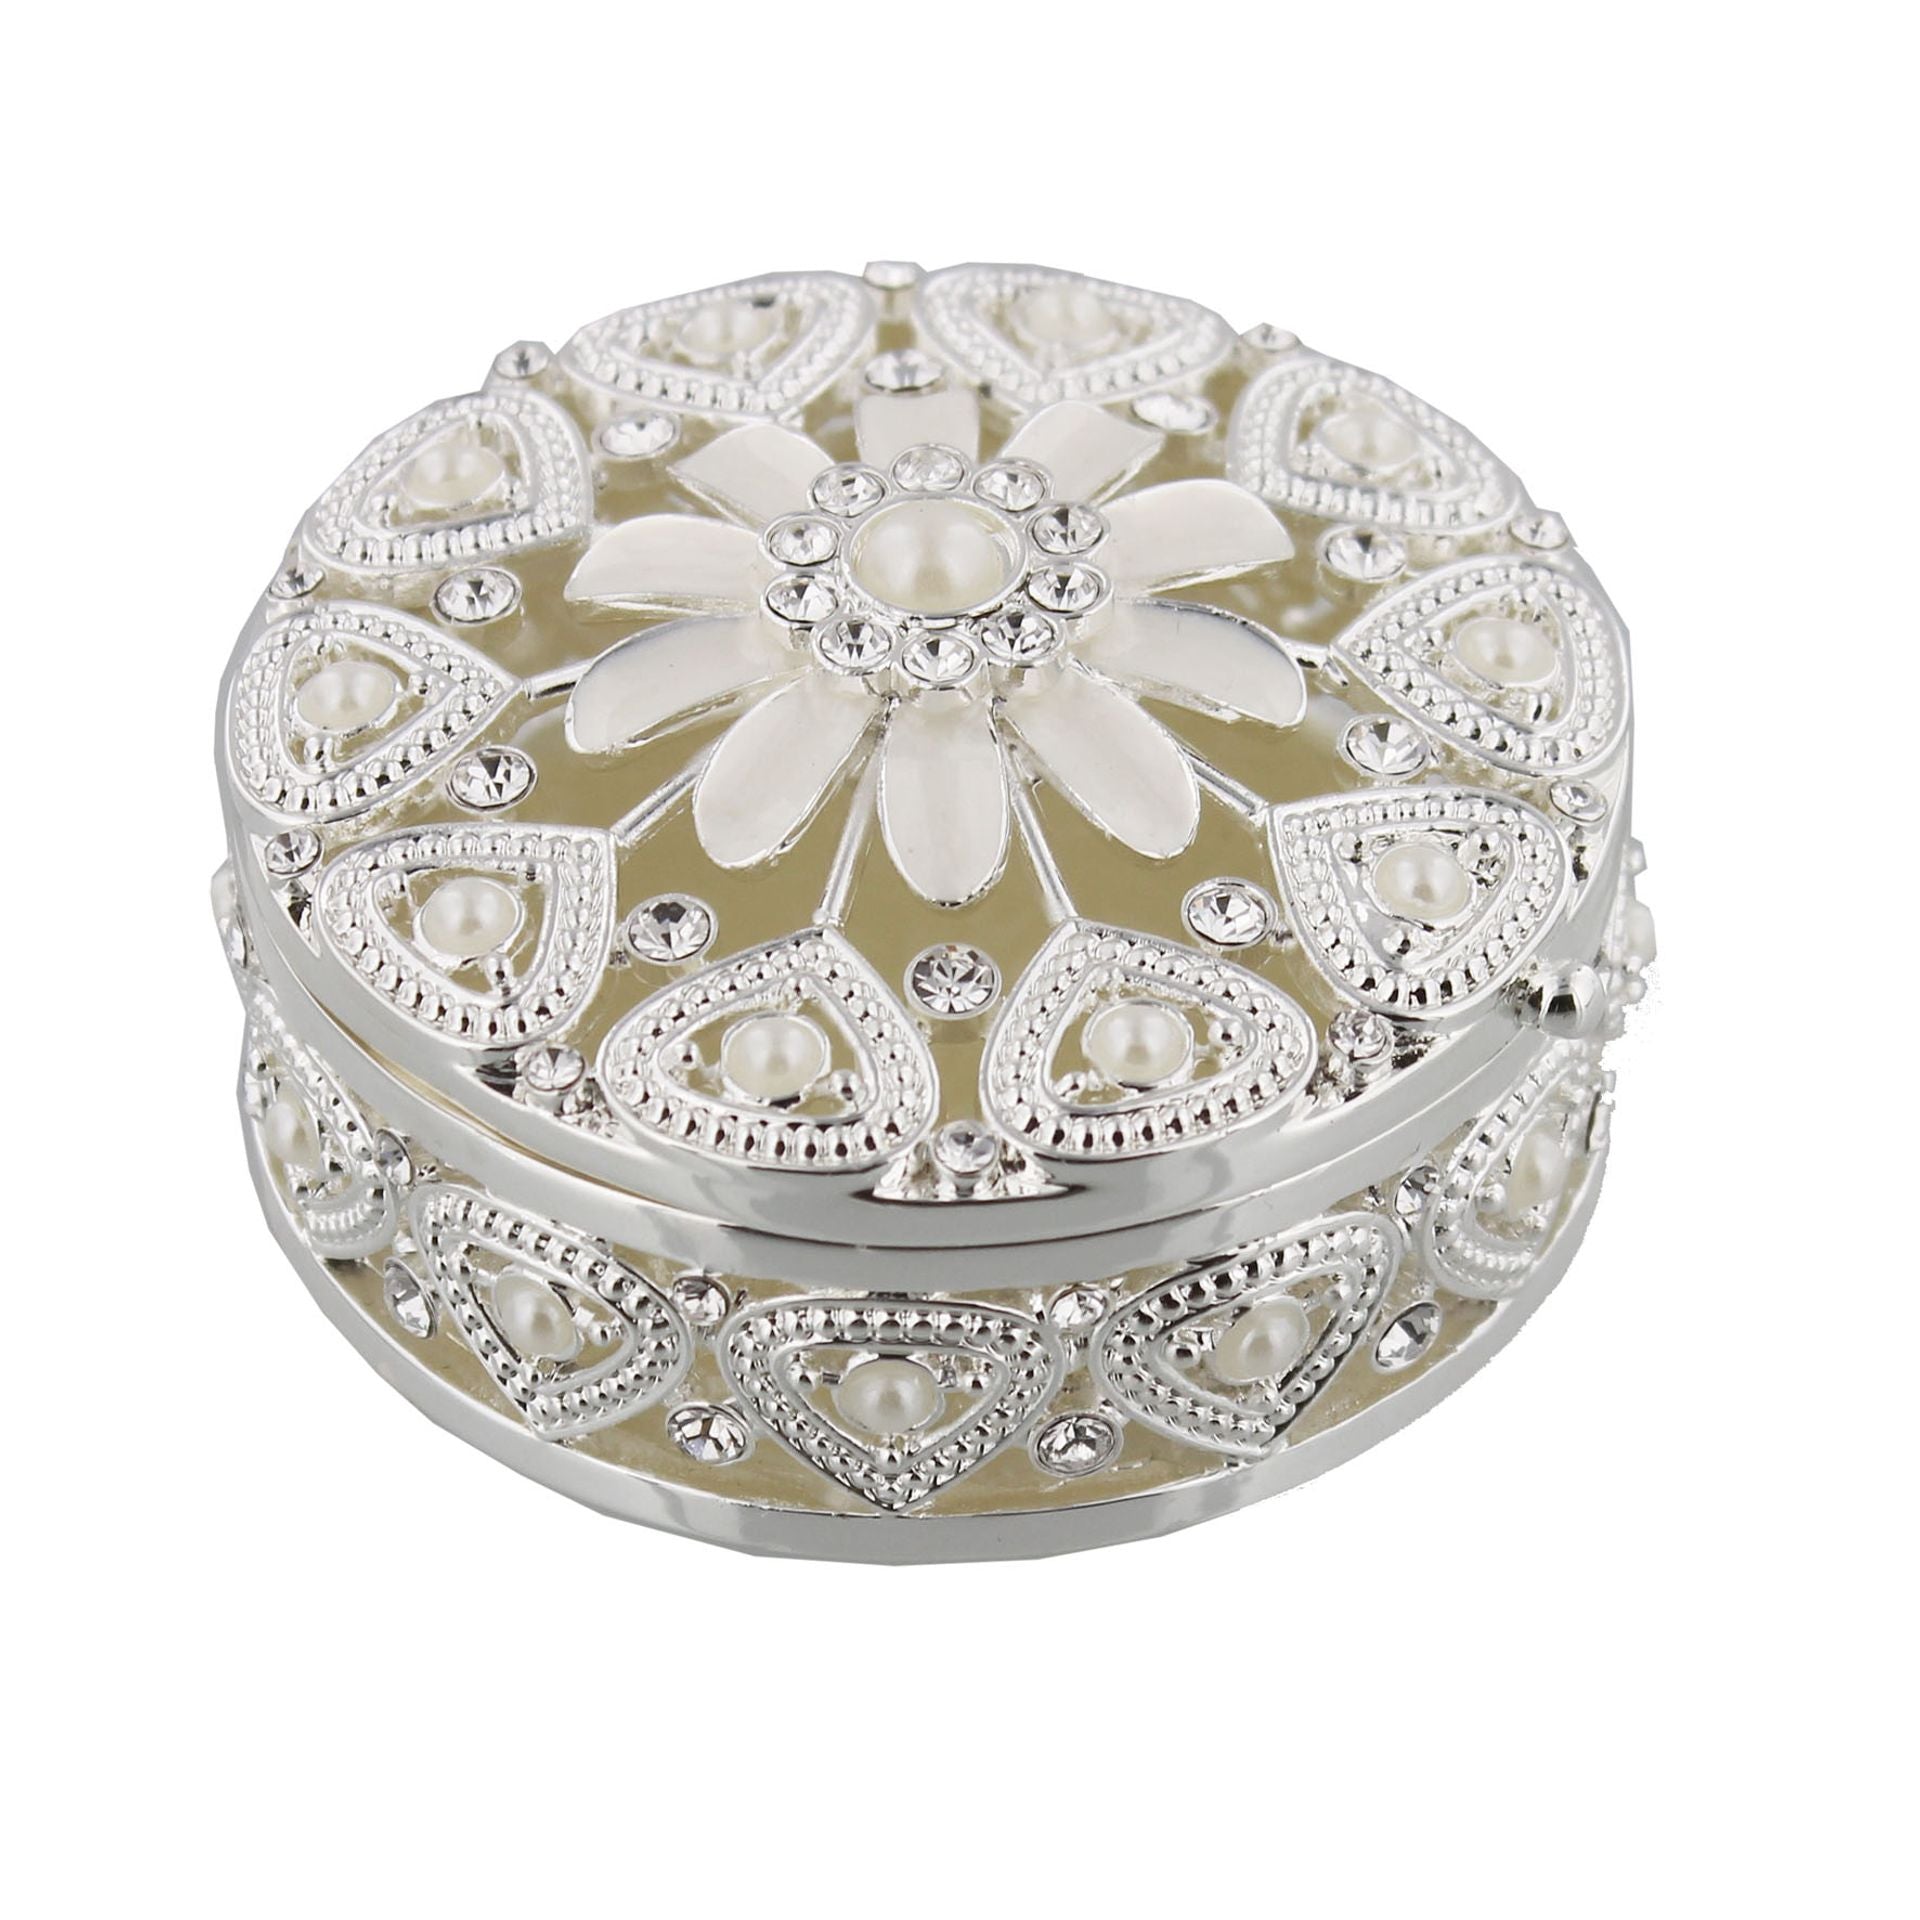 Silver-Plated Jewellery Box - Round